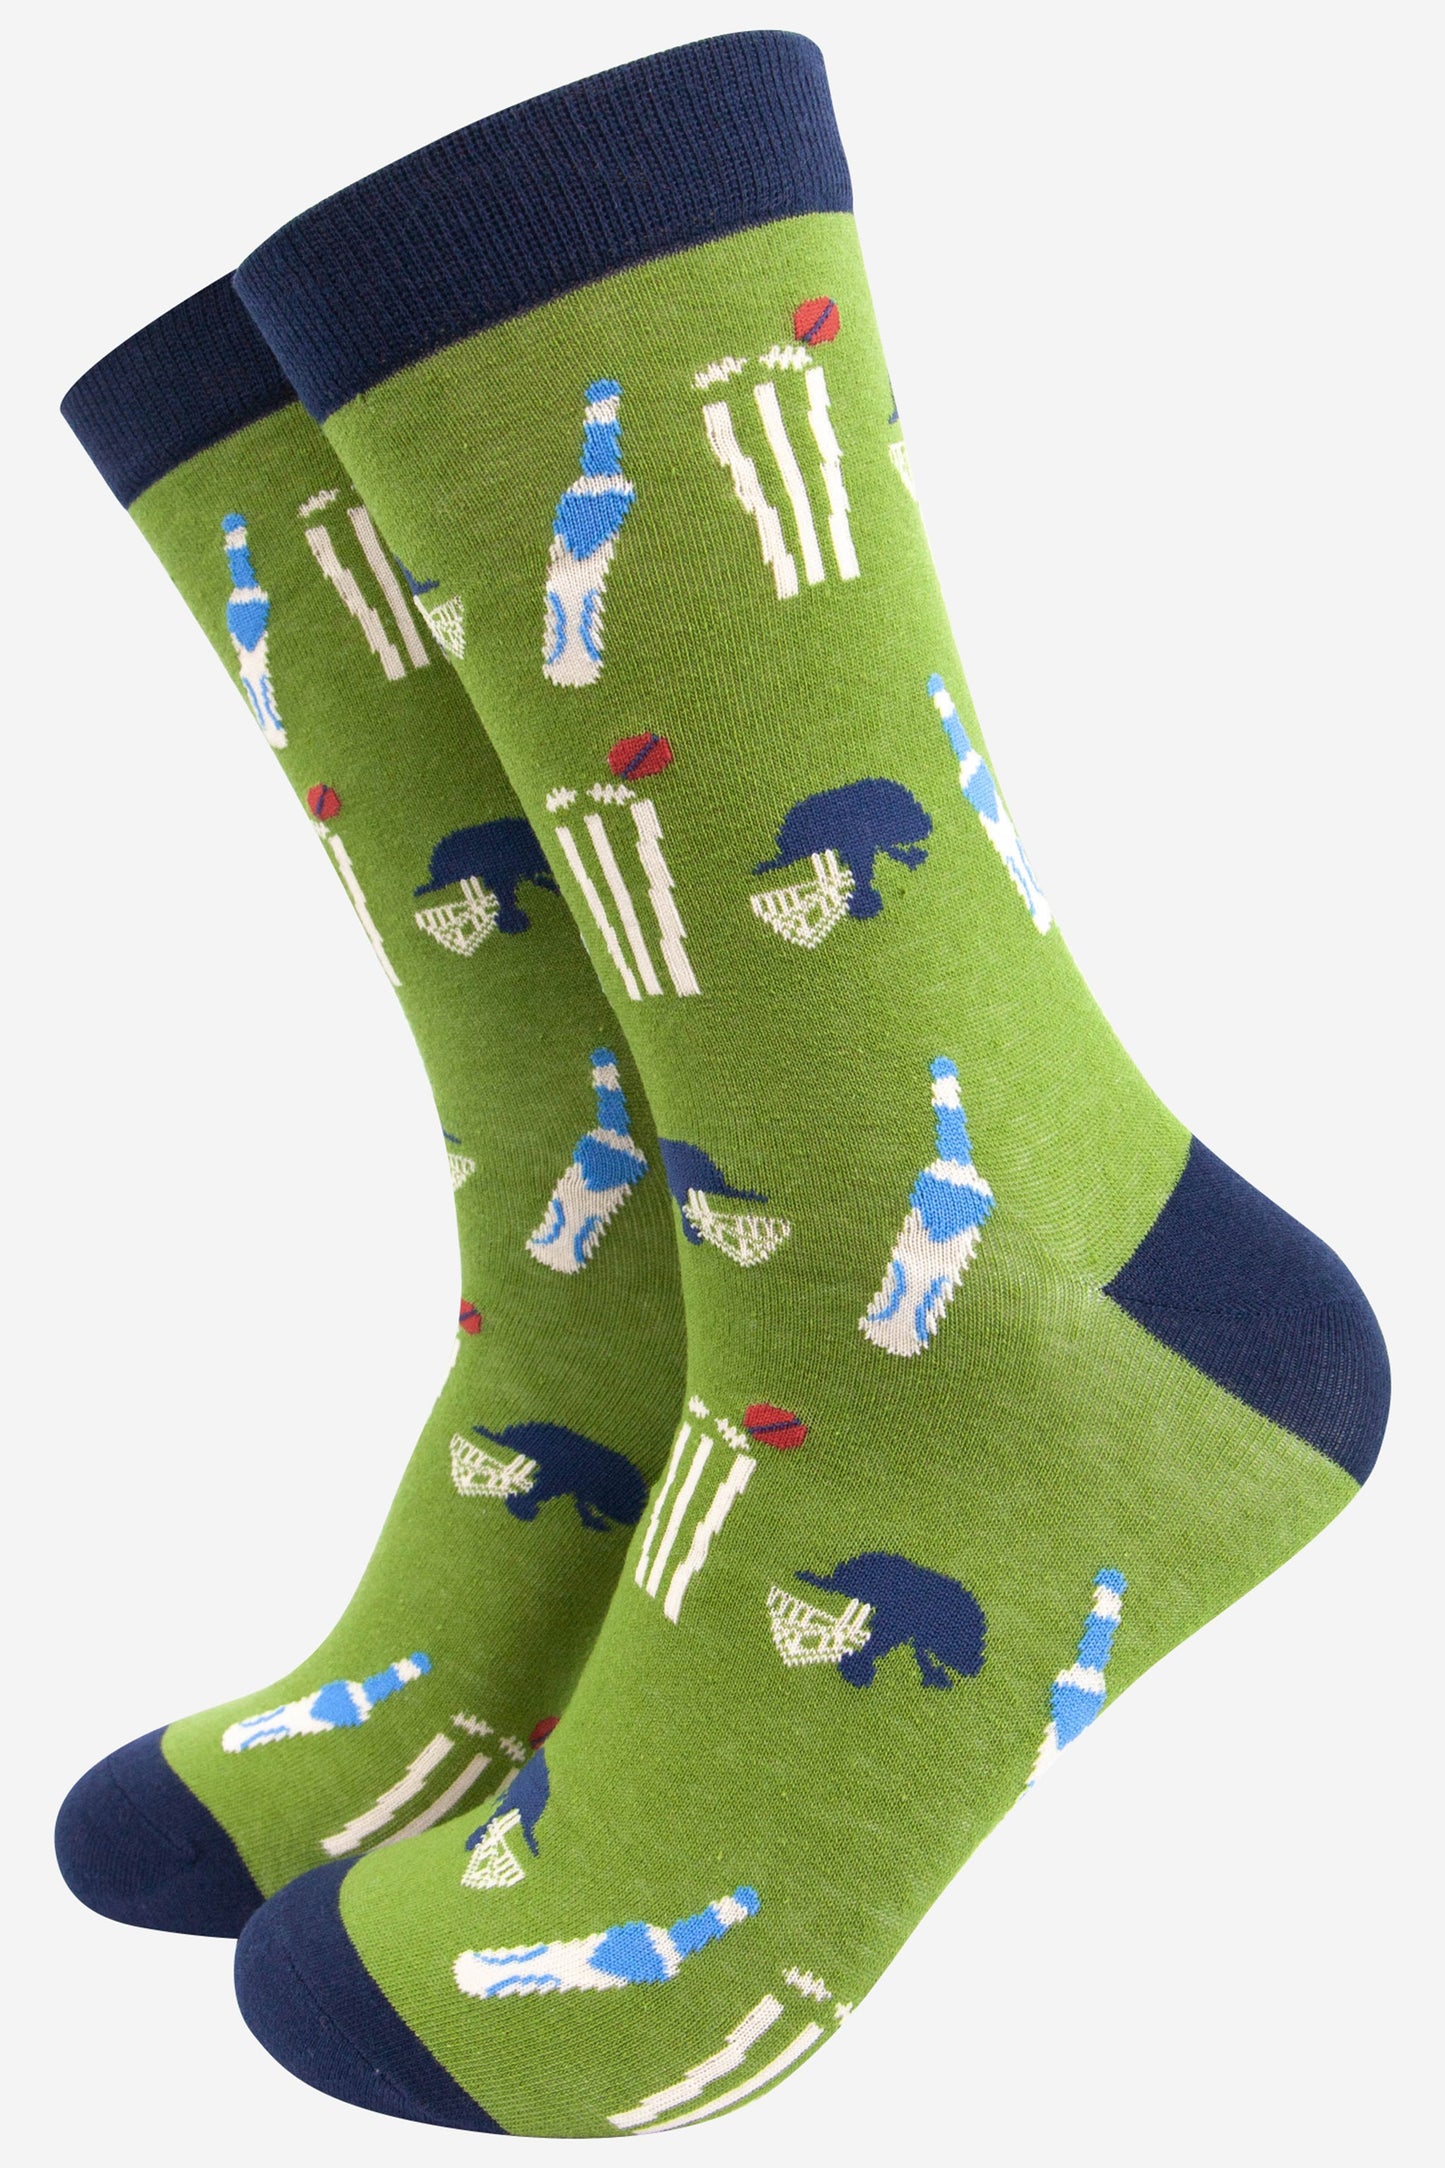 green and navy blue bamboo socks featuring a pattern of cricket stumps and bats